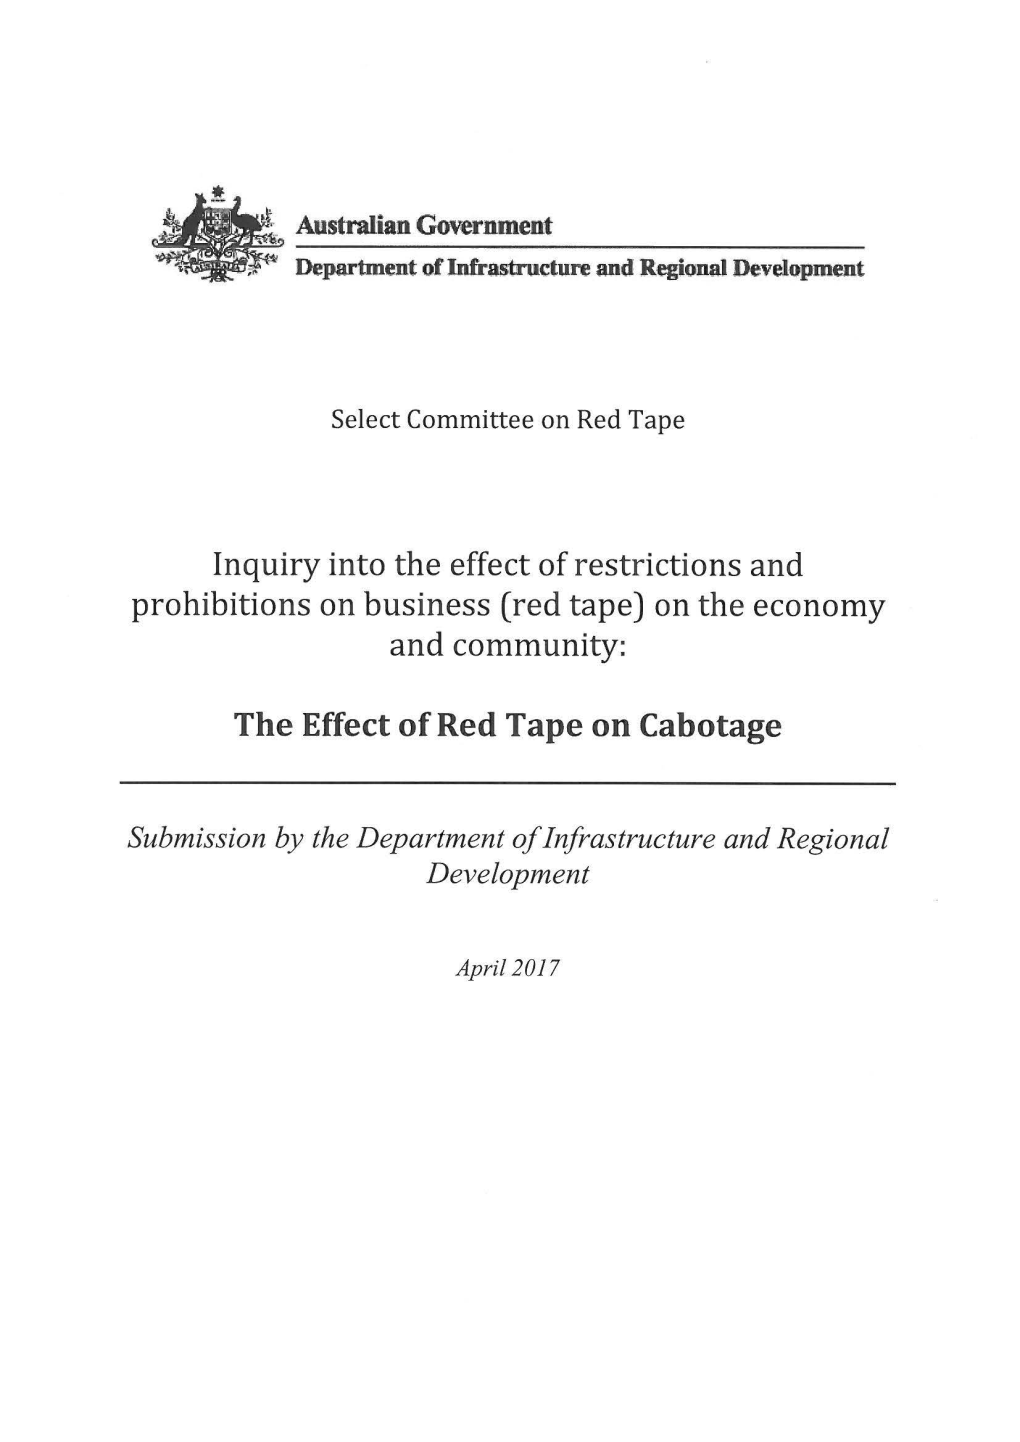 Inquiry Into the Effect of Restrictions and Prohibitions on Business (Red Tape) on the Economy and Community